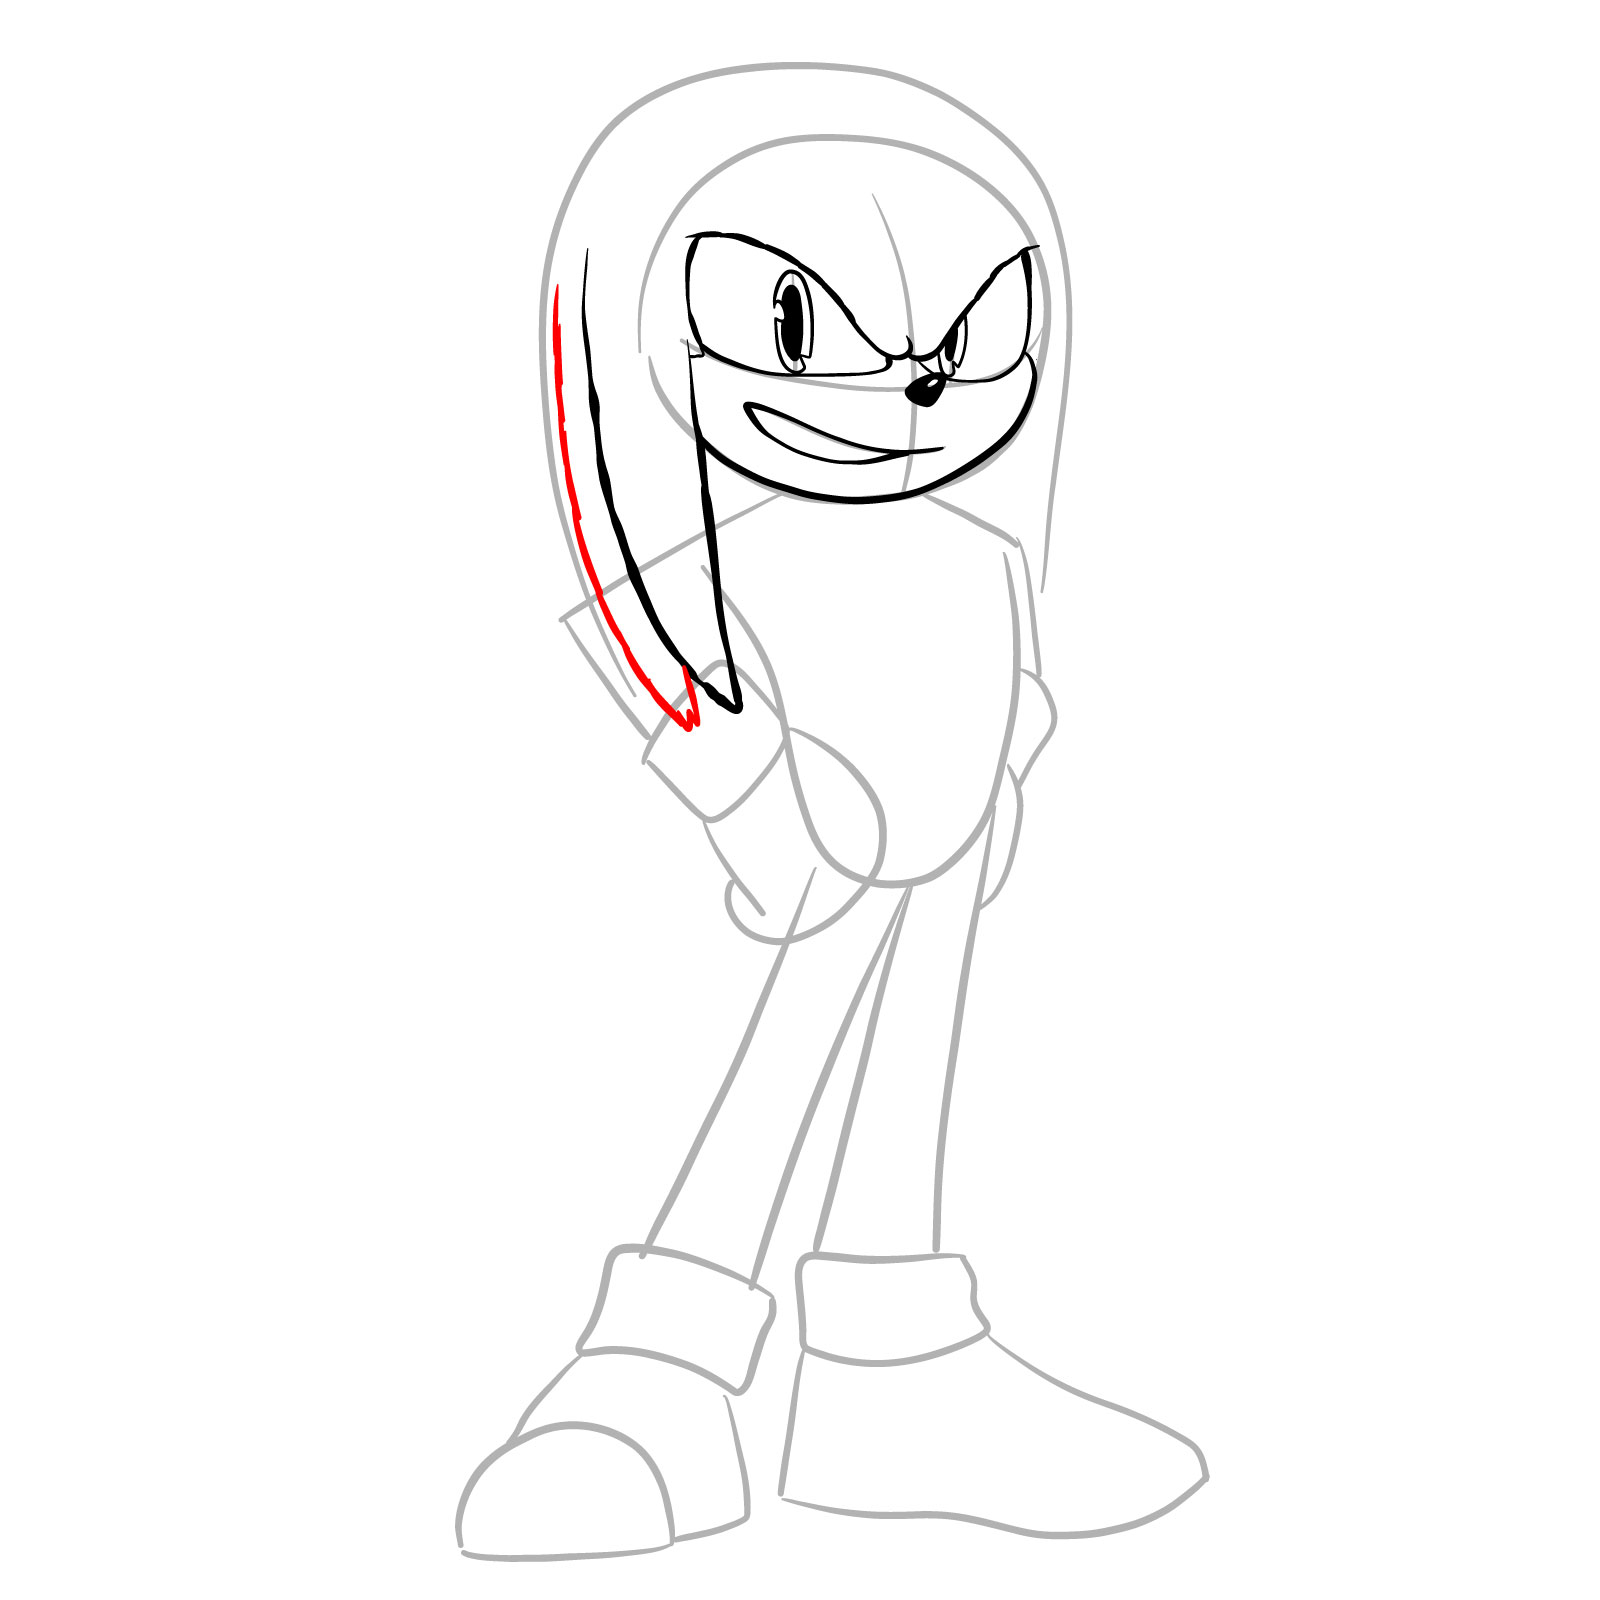 How to draw Knuckles from the movie - step 10